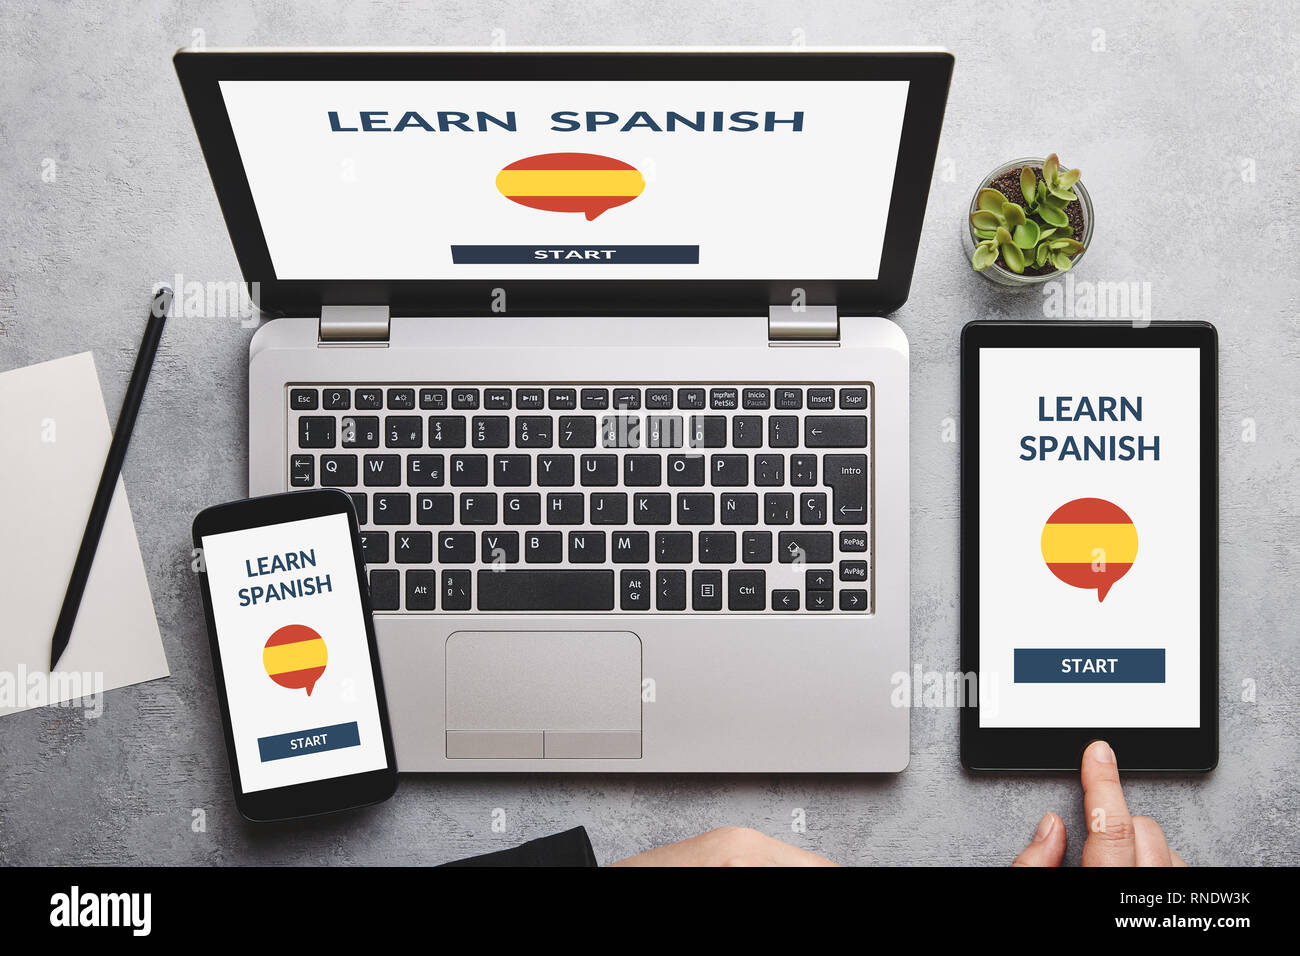 Learn Spanish concept on laptop, tablet and smartphone screen over gray table. All screen content is designed by me. Flat lay Stock Photo